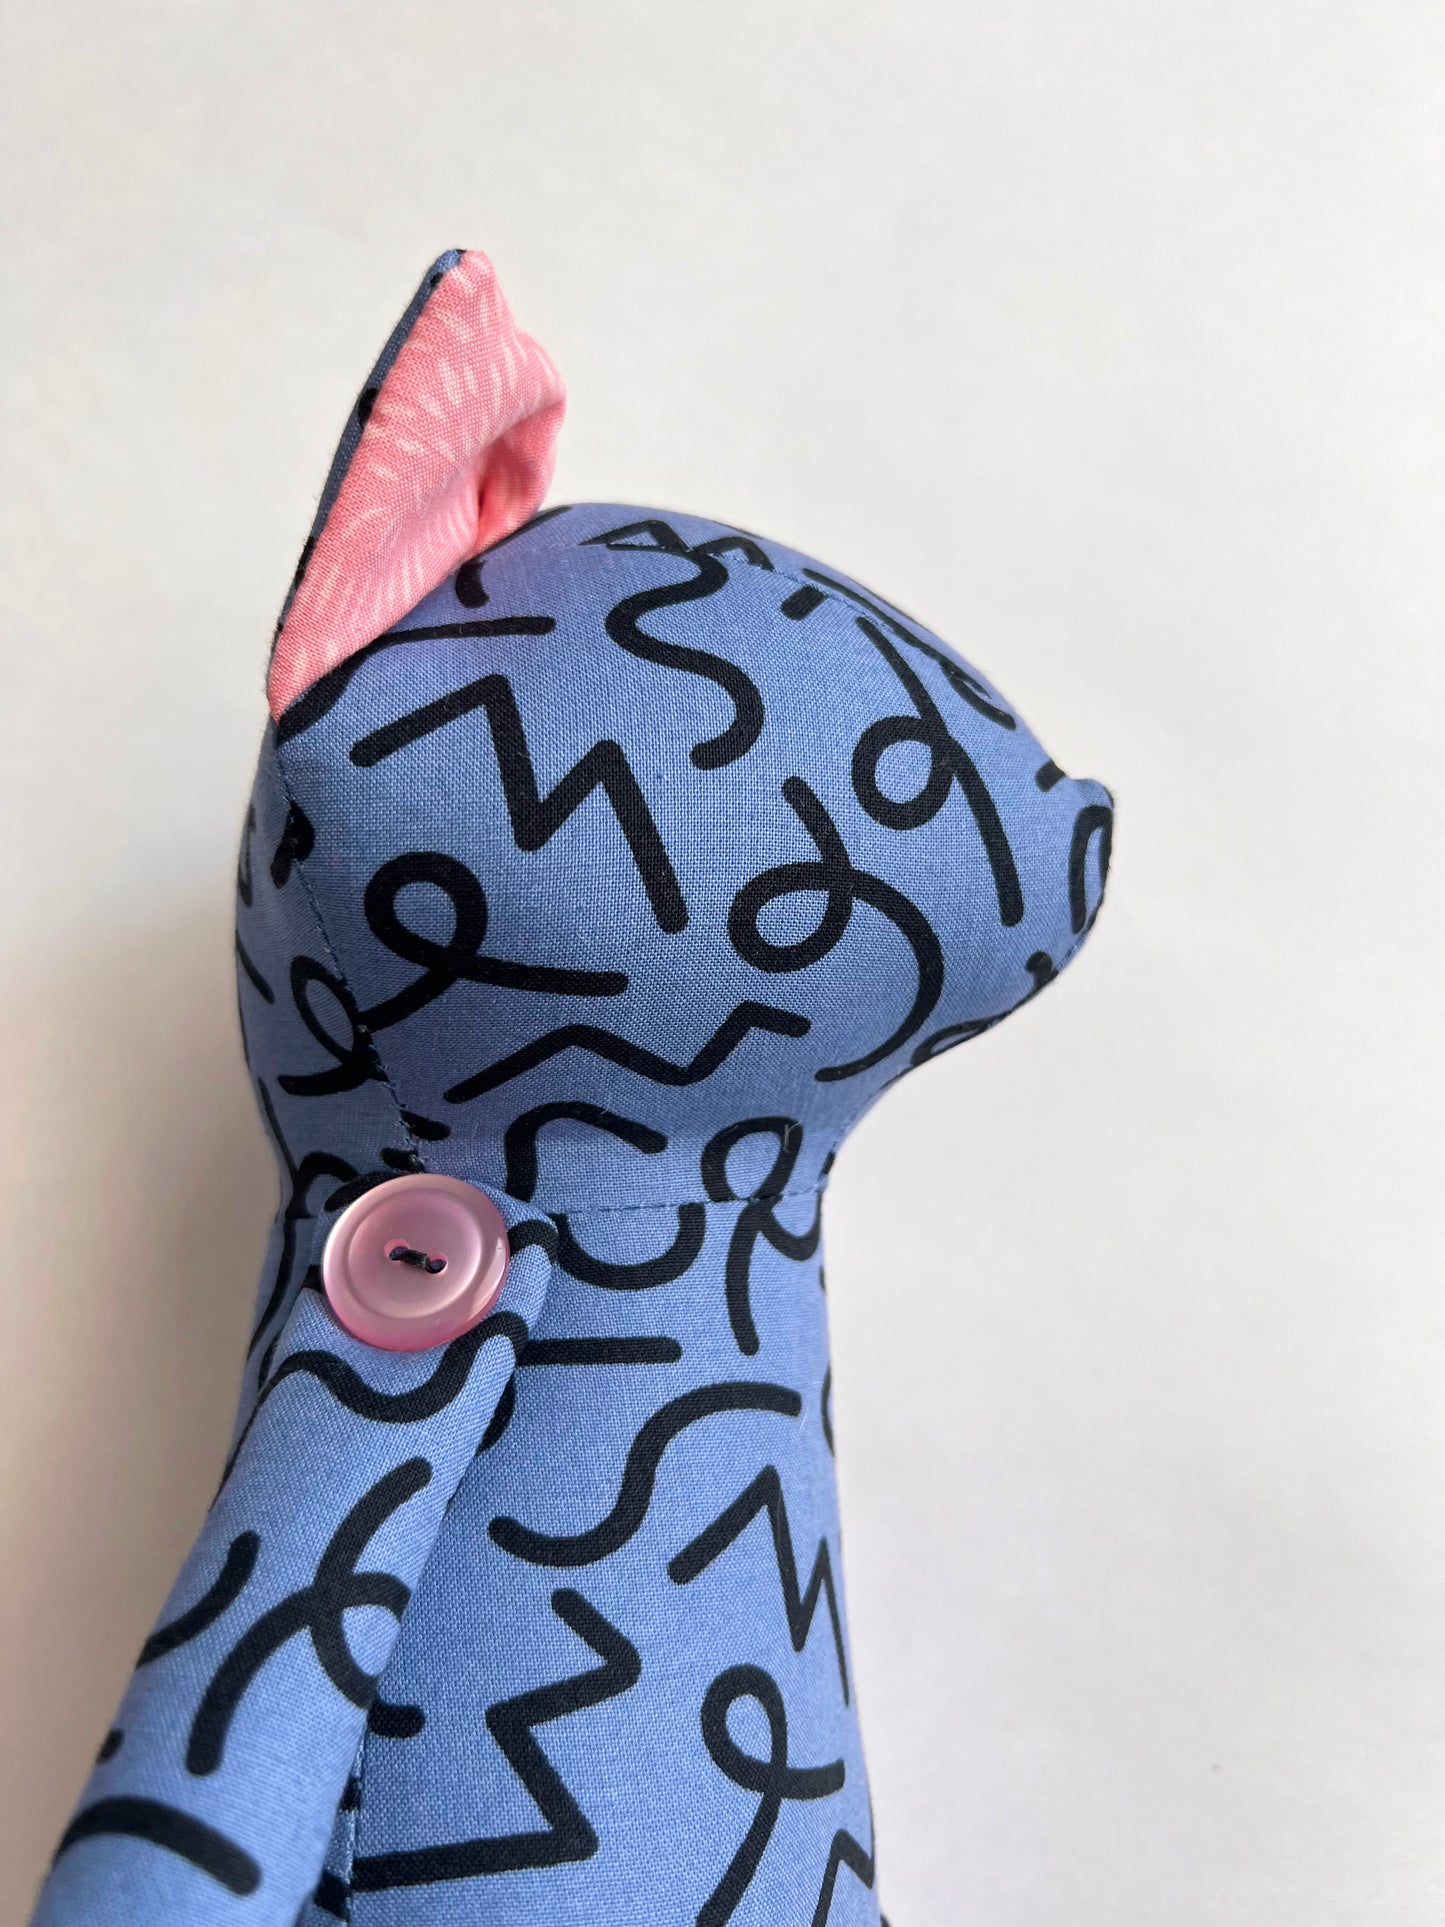 Kitty Cat Doll - Doodles